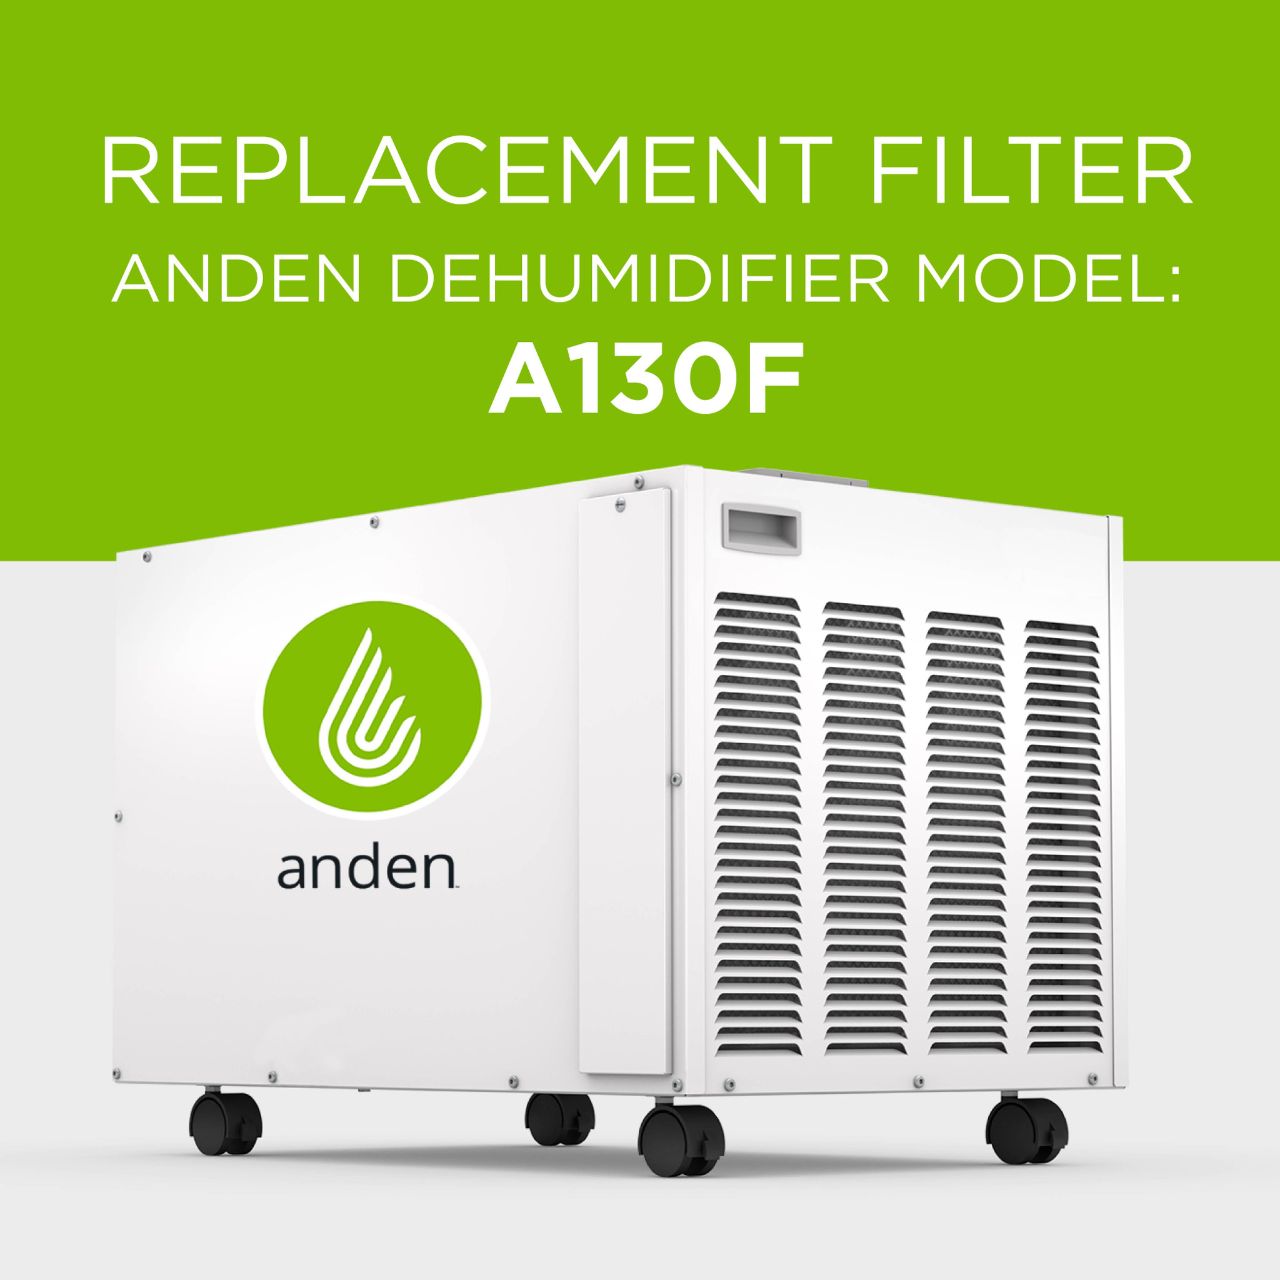 Anden-Model-A130F-Dehumidifier-Replacement-Air Filter